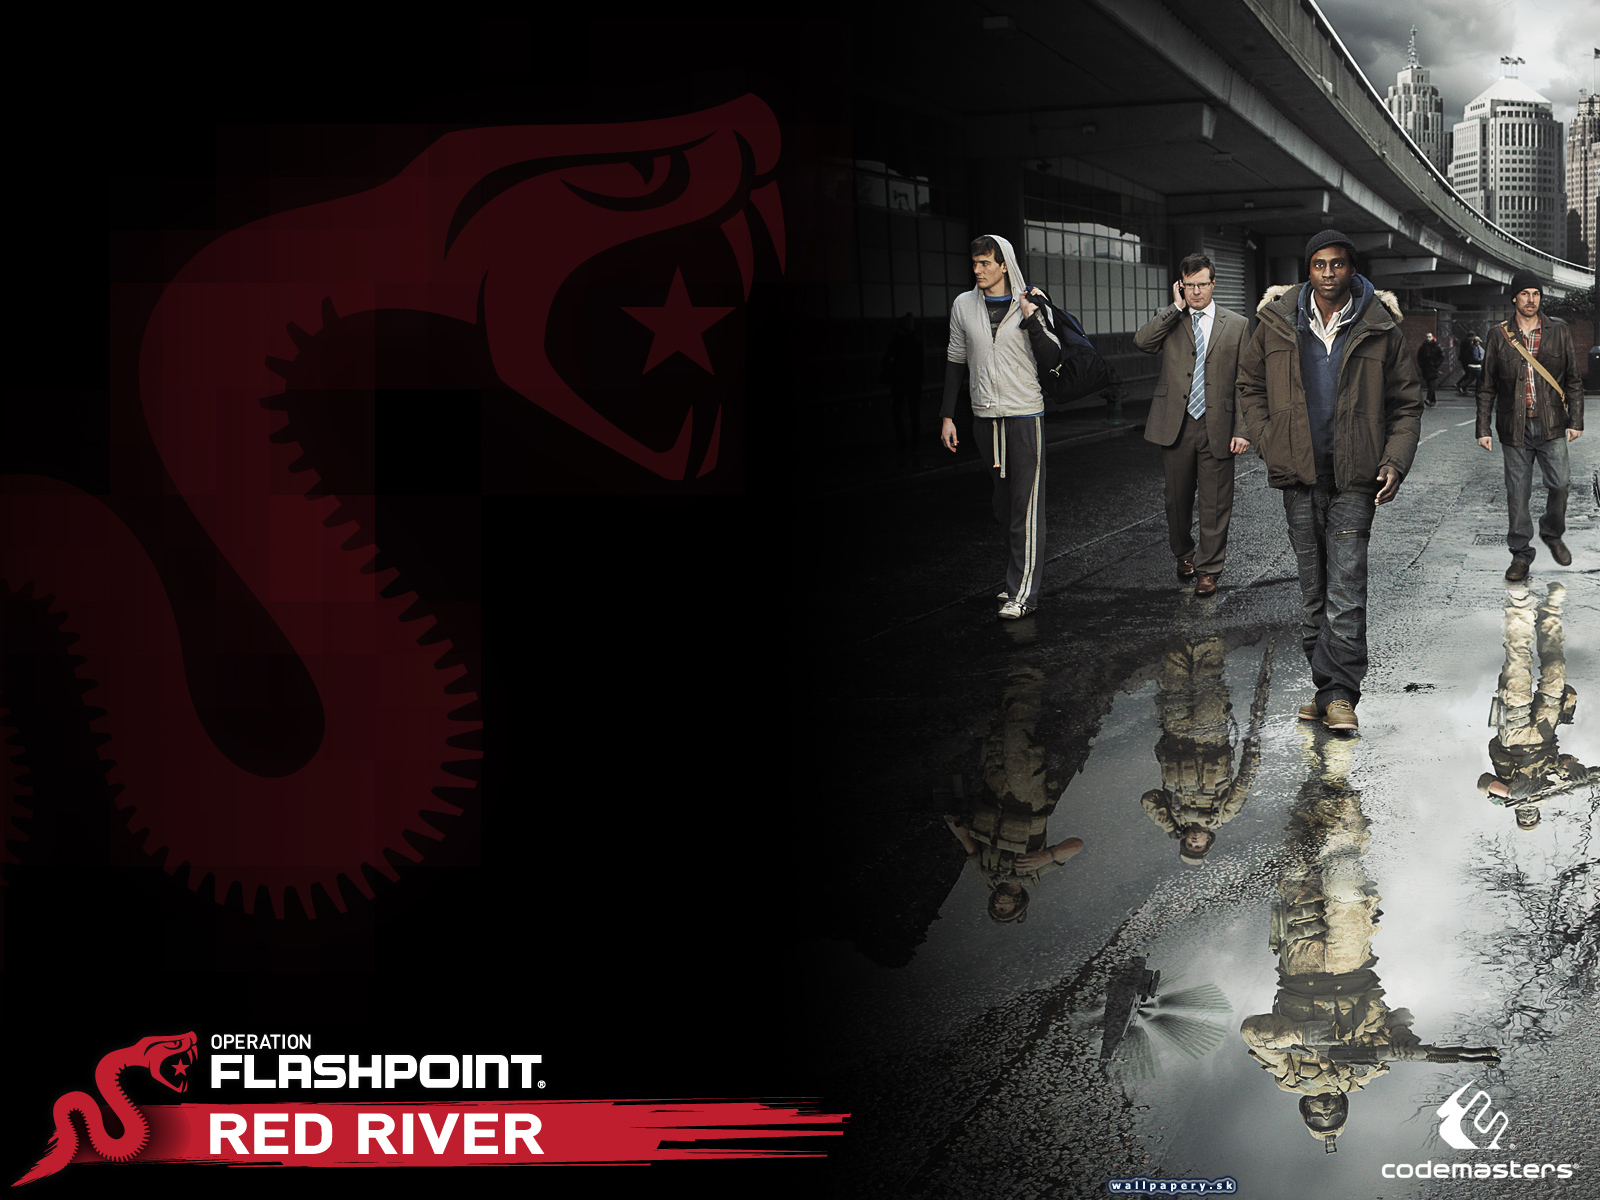 Operation Flashpoint: Red River - wallpaper 2